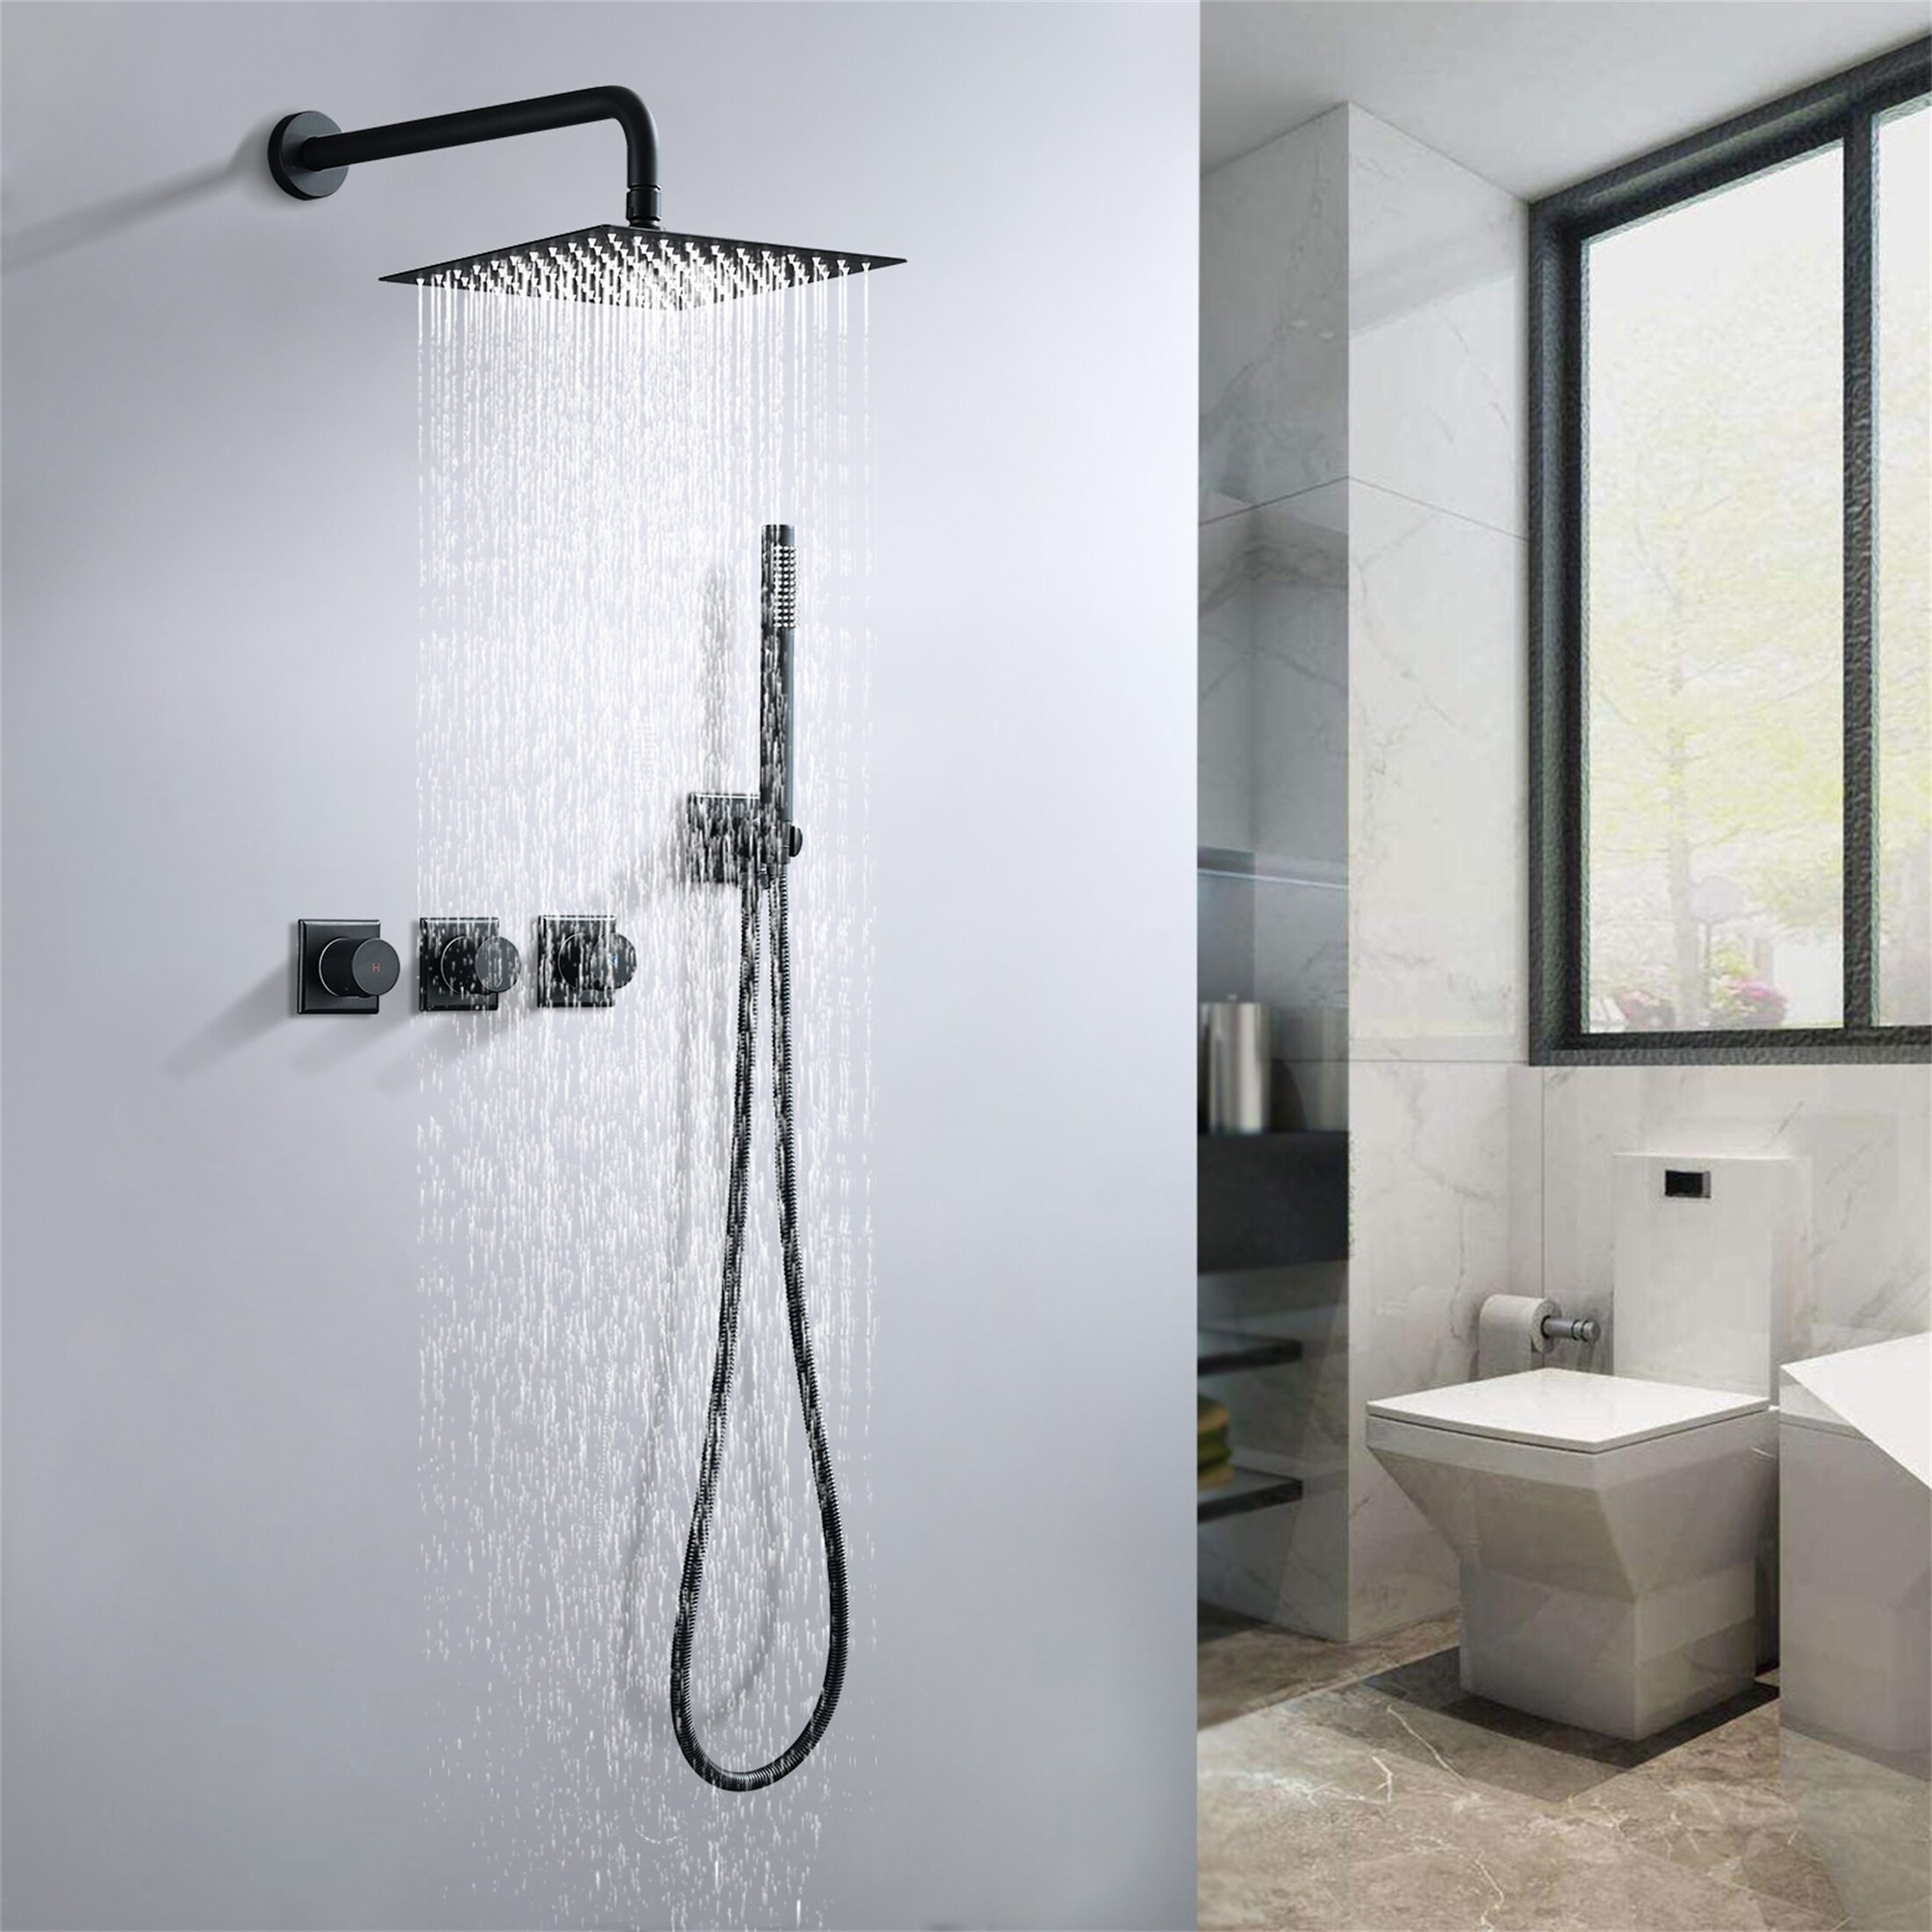 https://ak1.ostkcdn.com/images/products/is/images/direct/d17a04d67e348a7adf511eb0542c93297a7749b4/Matte-Black-Combo-Set-Wall-Mounted-Rainfall-Shower-Head-System.jpg